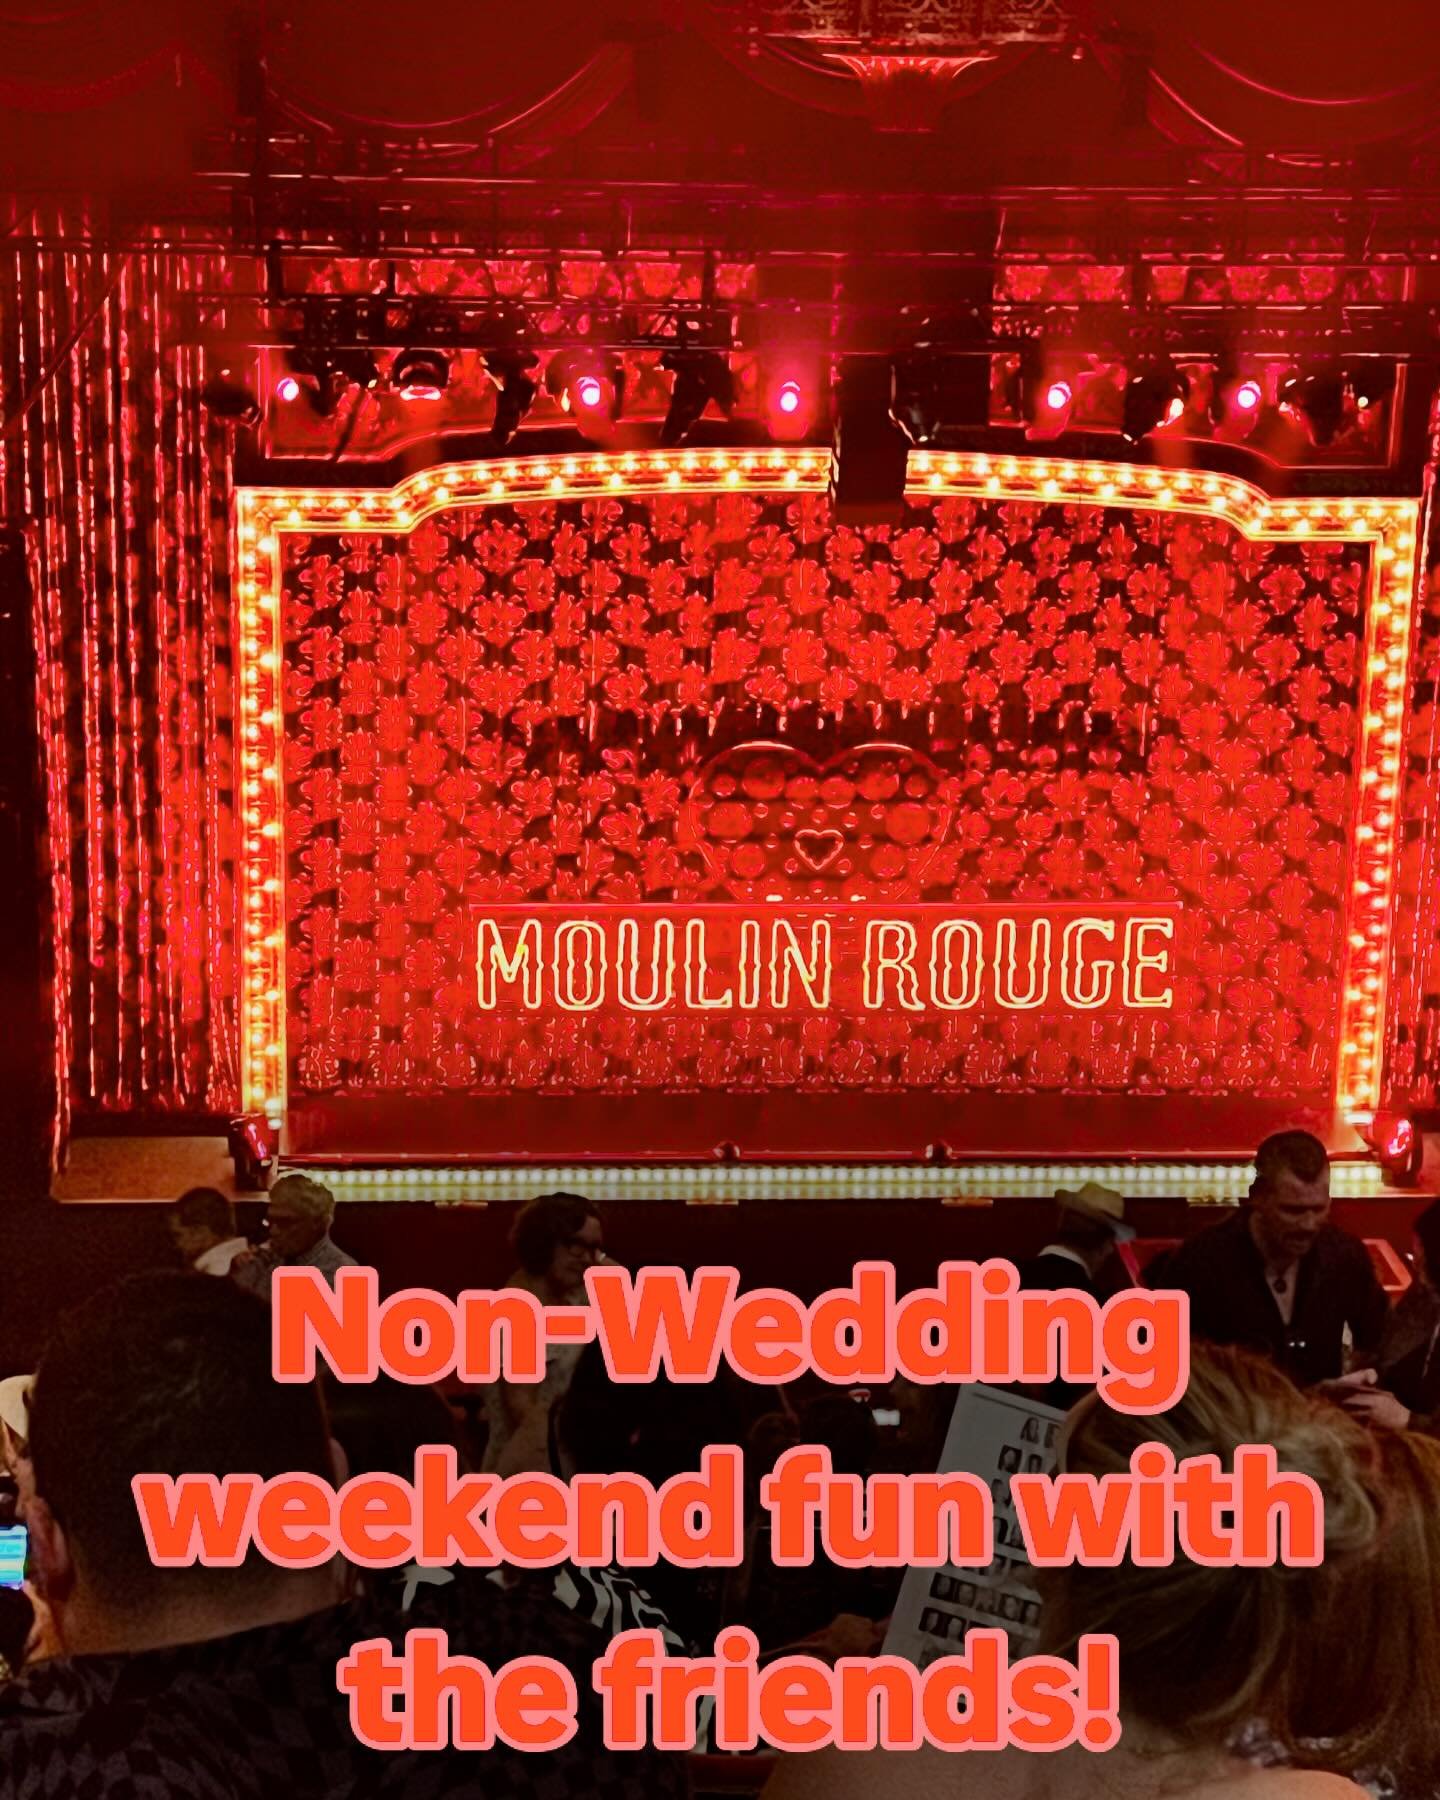 Wonderful night at the theatre with friends. If you have the chance, catch Moulin Rouge, it was wonderful.